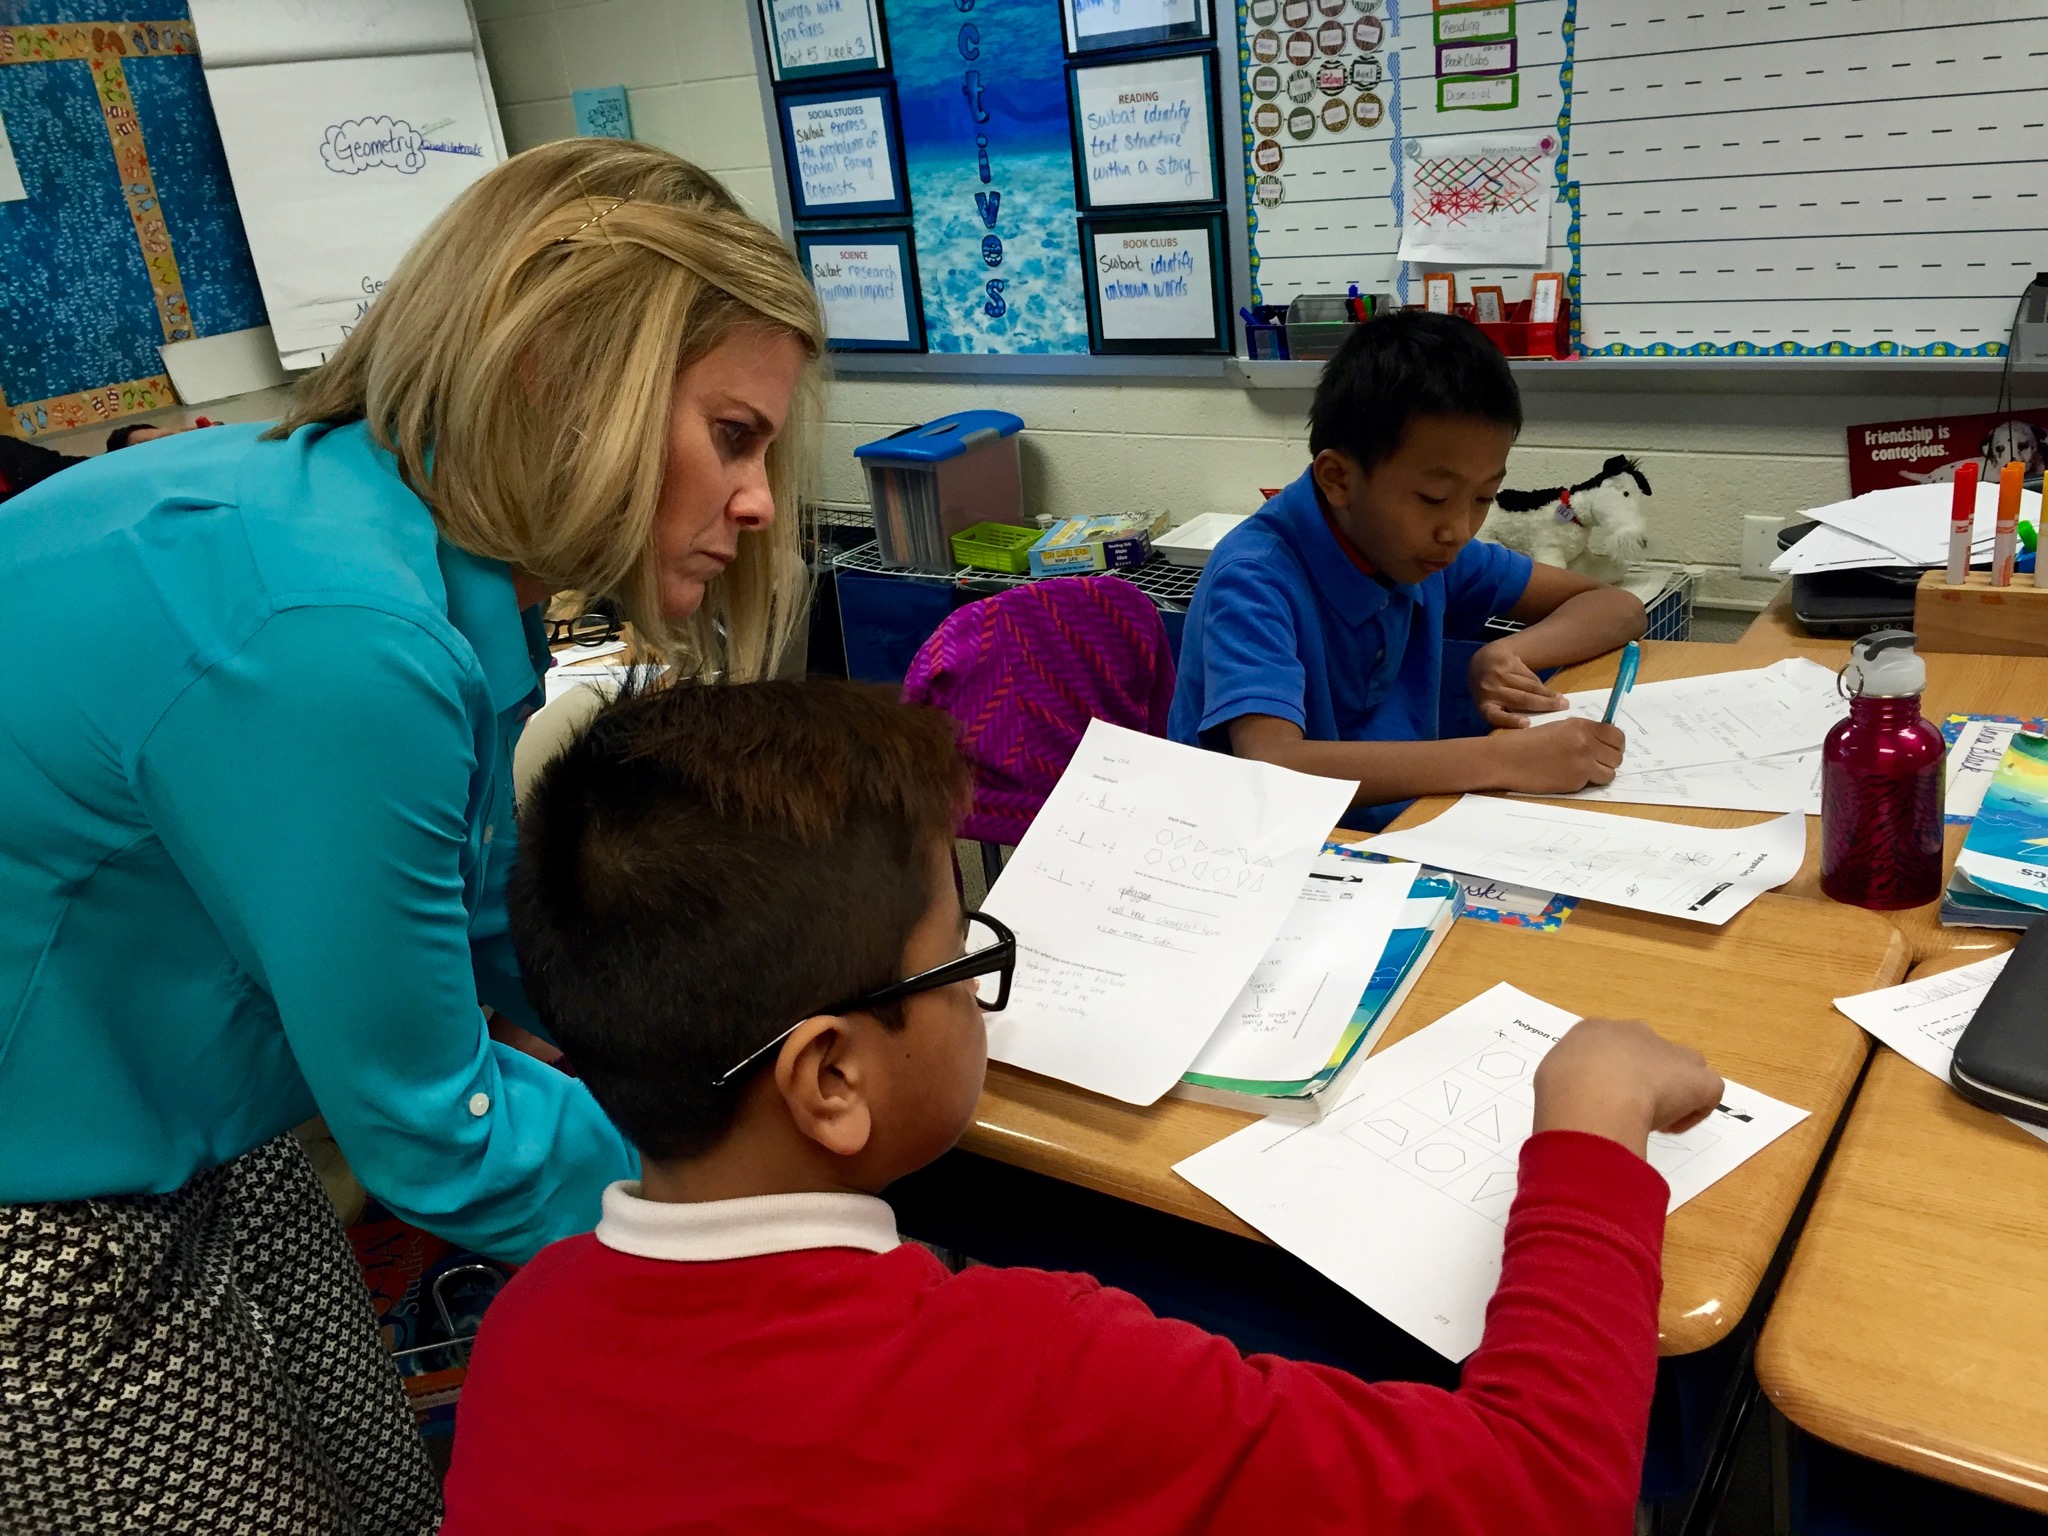 Angie Kendall, a master teacher at Southport Elementary School, works with a student. The school received an A from the state this year.